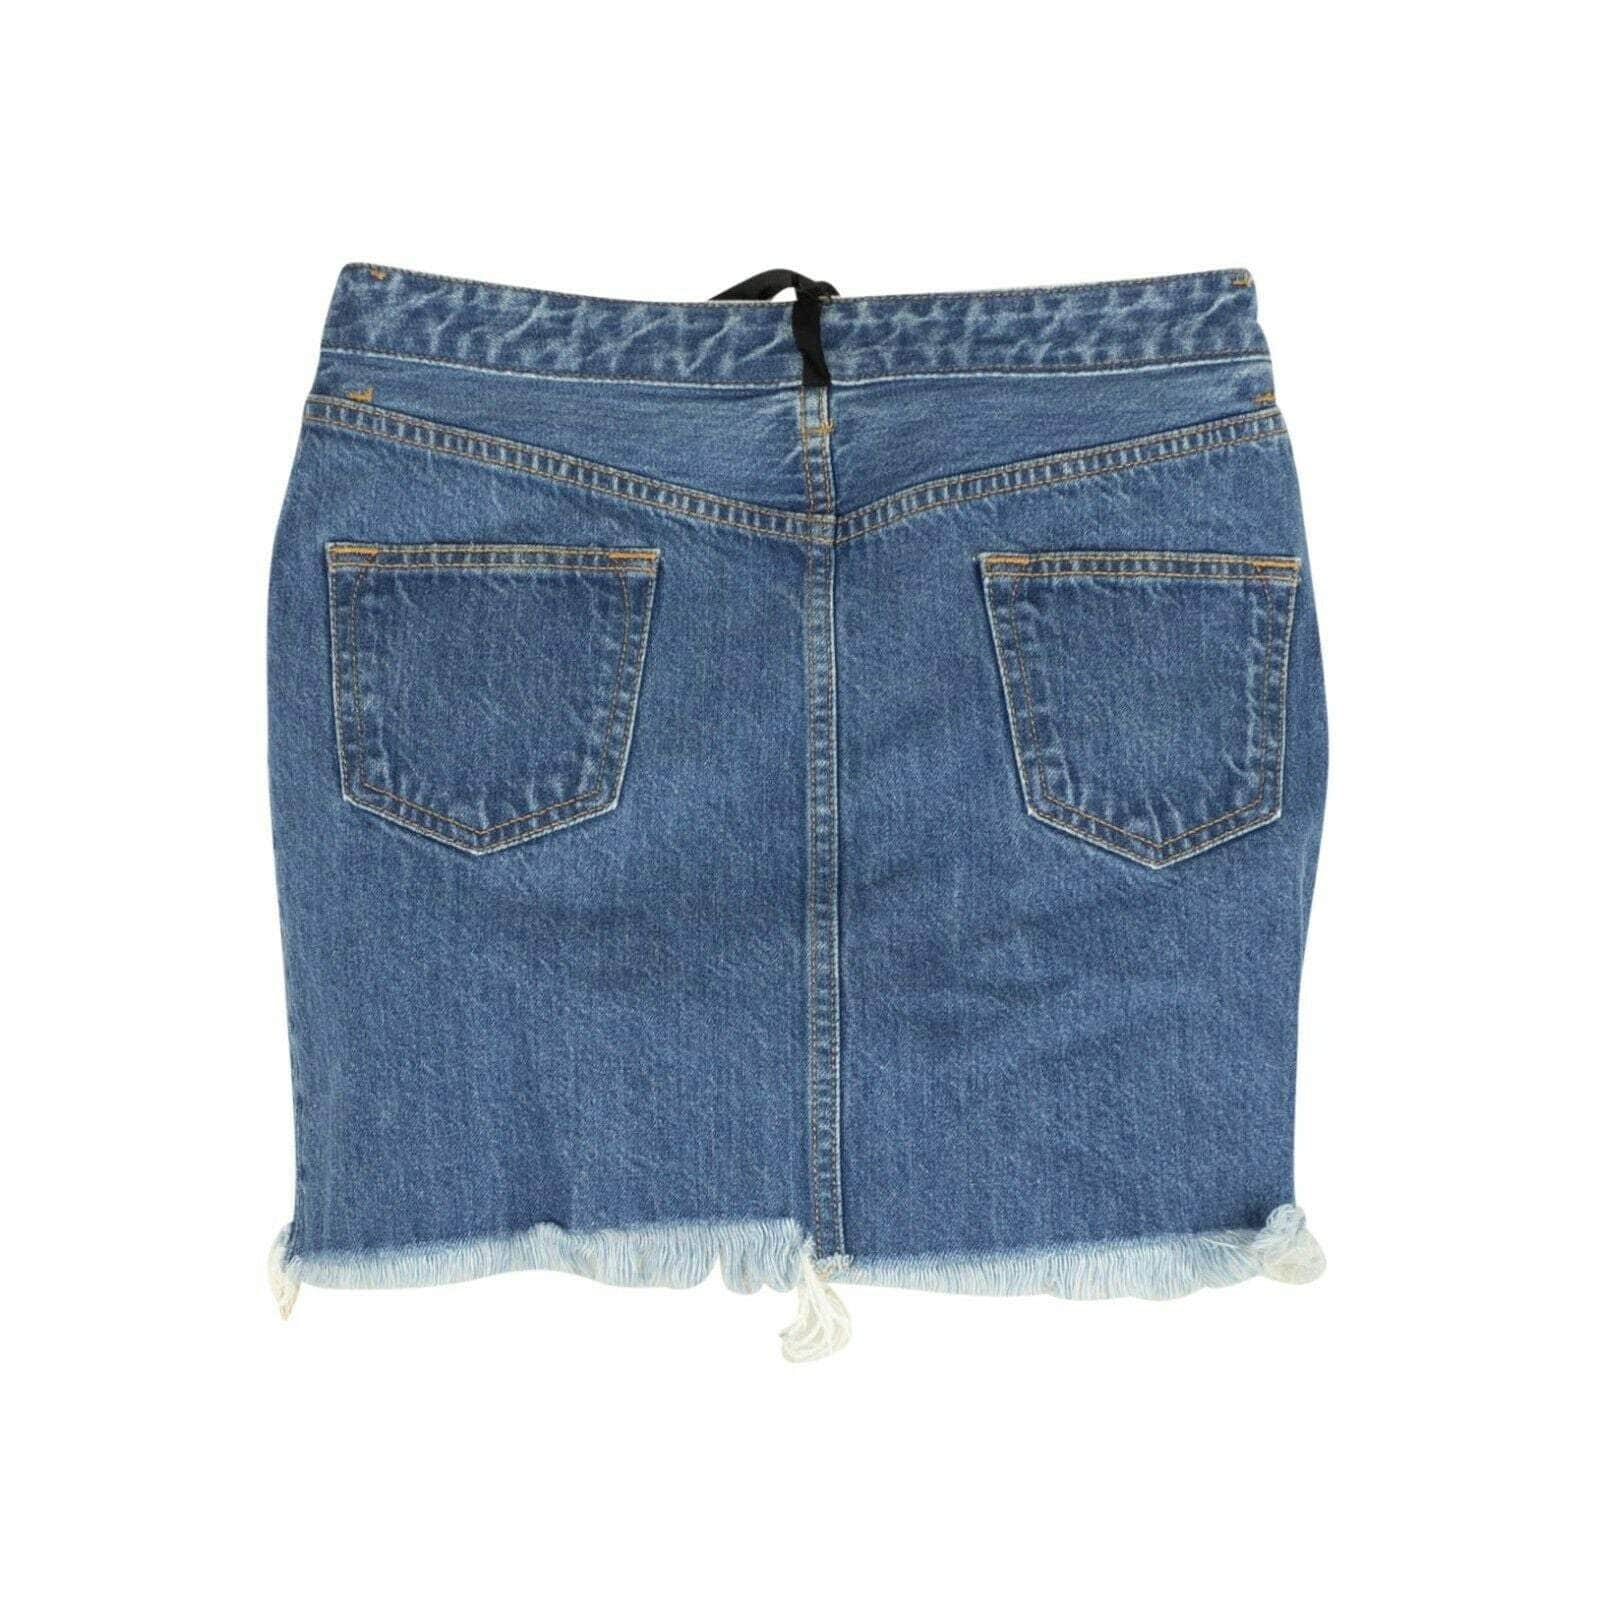 Unravel Project channelenable-all, chicmi, couponcollection, gender-womens, main-clothing, size-25, size-26, size-27, size-28, under-250, unravel-project Blue Wash Tulle Denim Mini Skirt